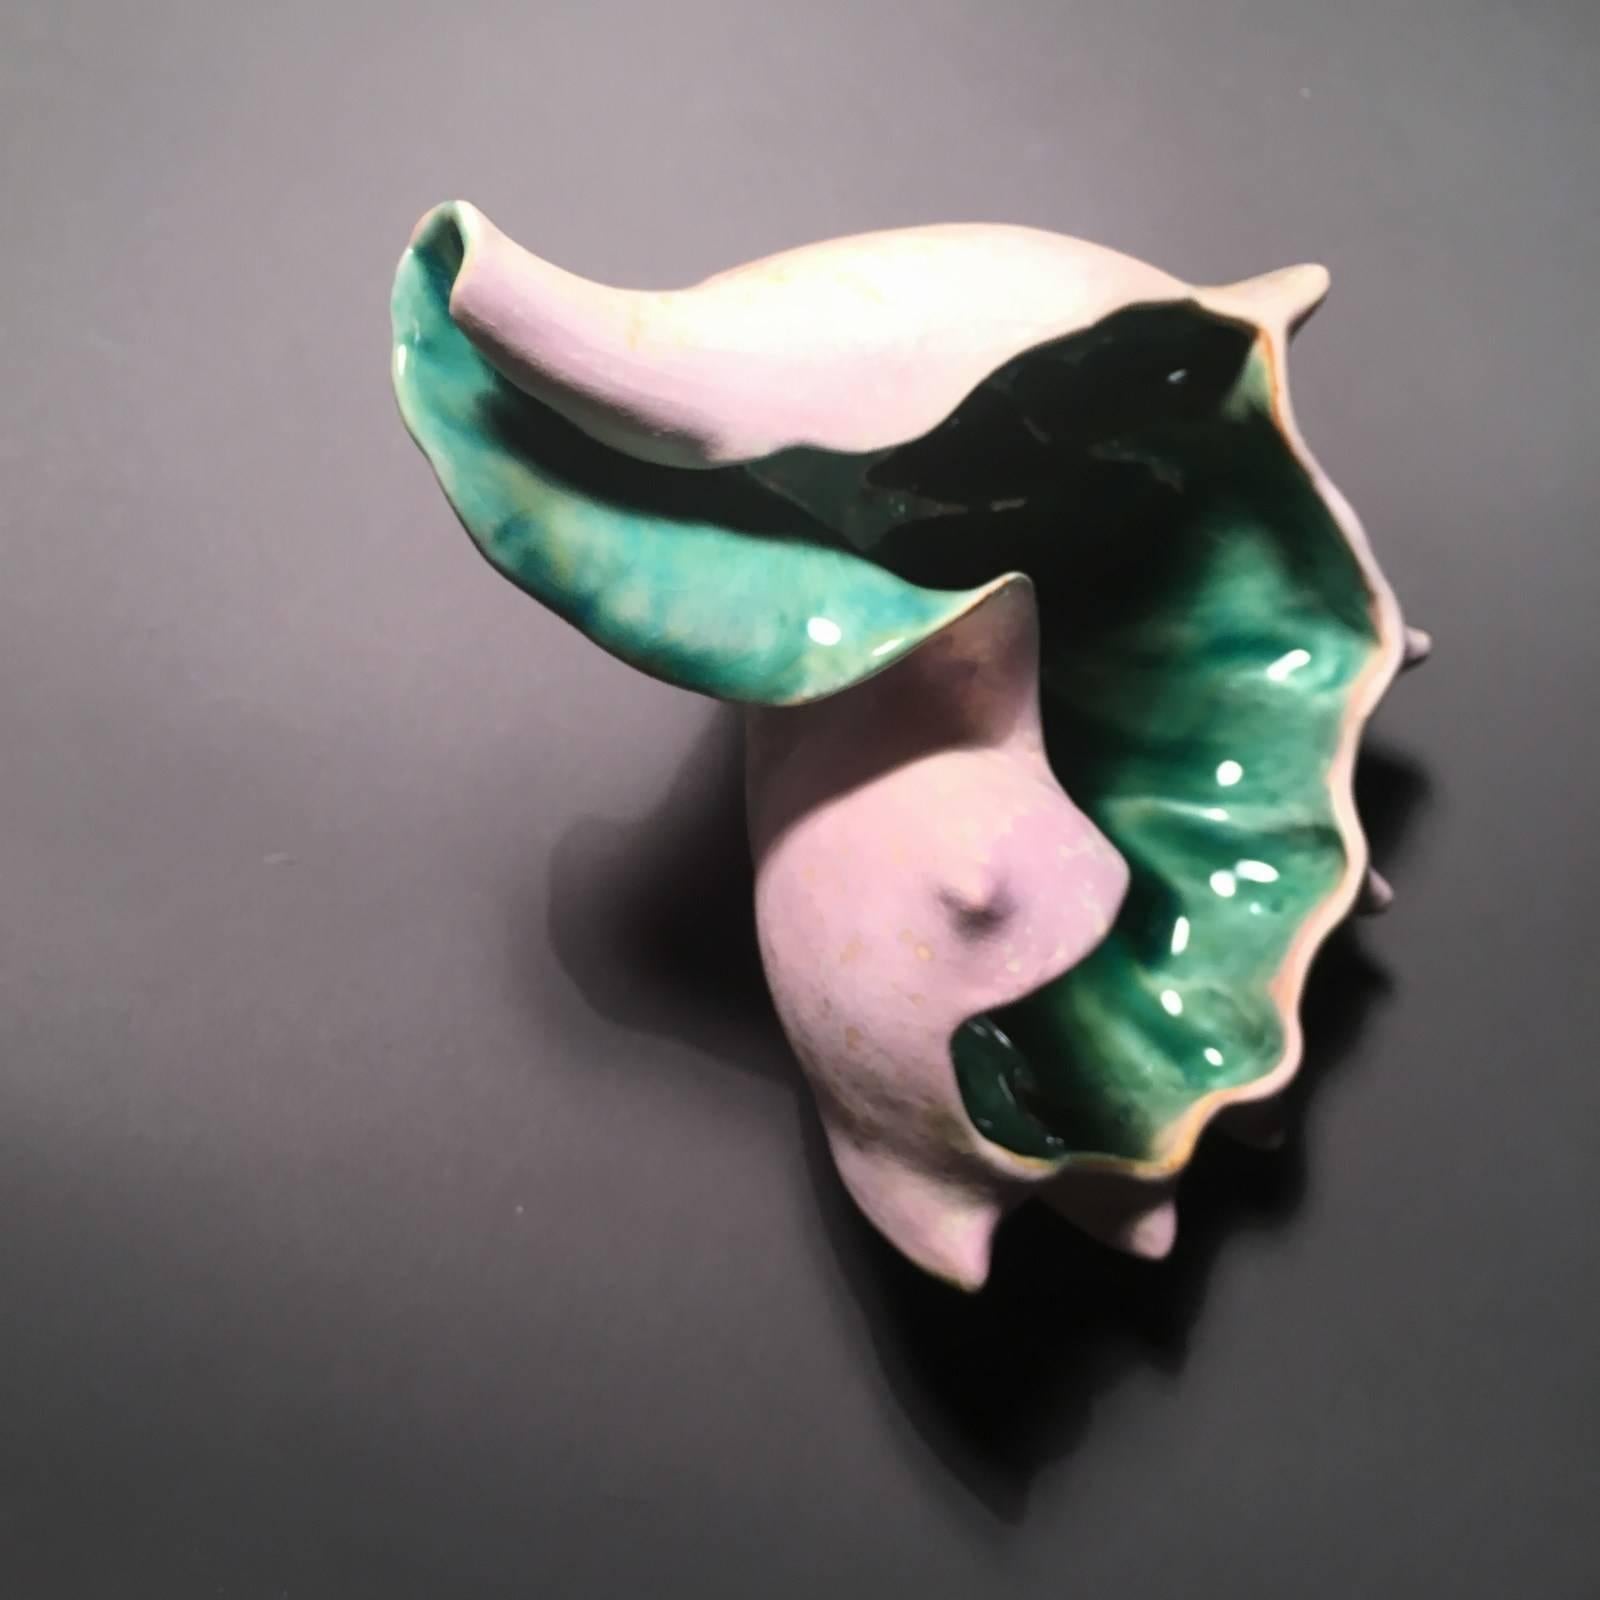 Meditation bowl inspired by a conch shell - Sculpture by Alice Ballard